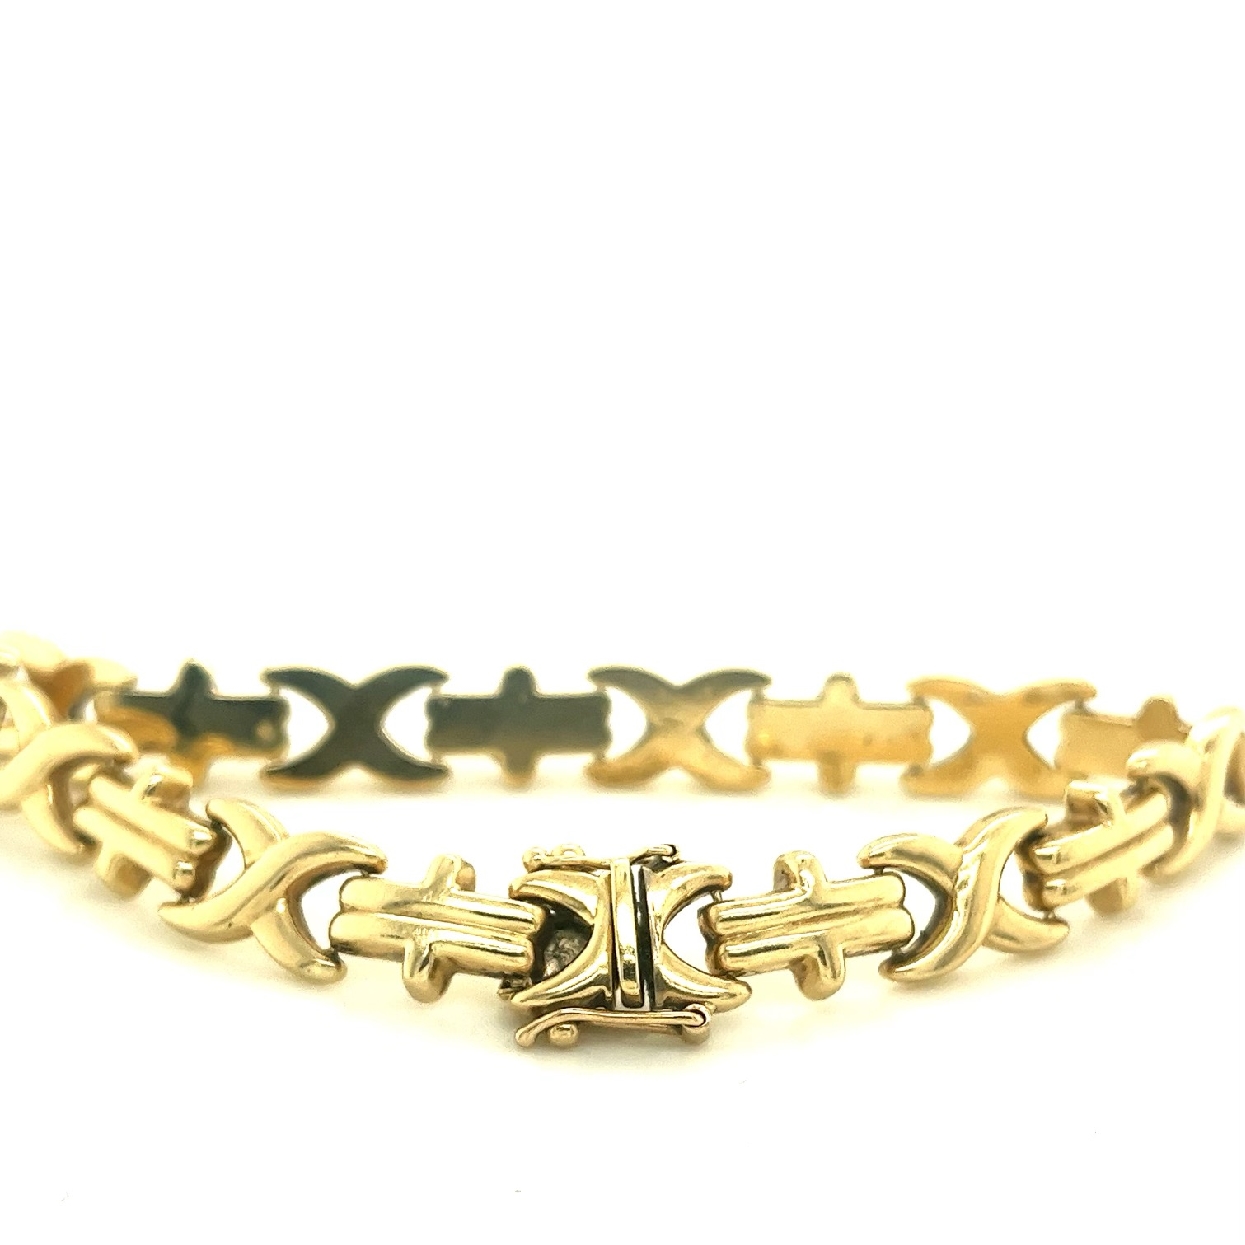 14K Yellow Gold Geometric Patterned Bracelet 8 Inches